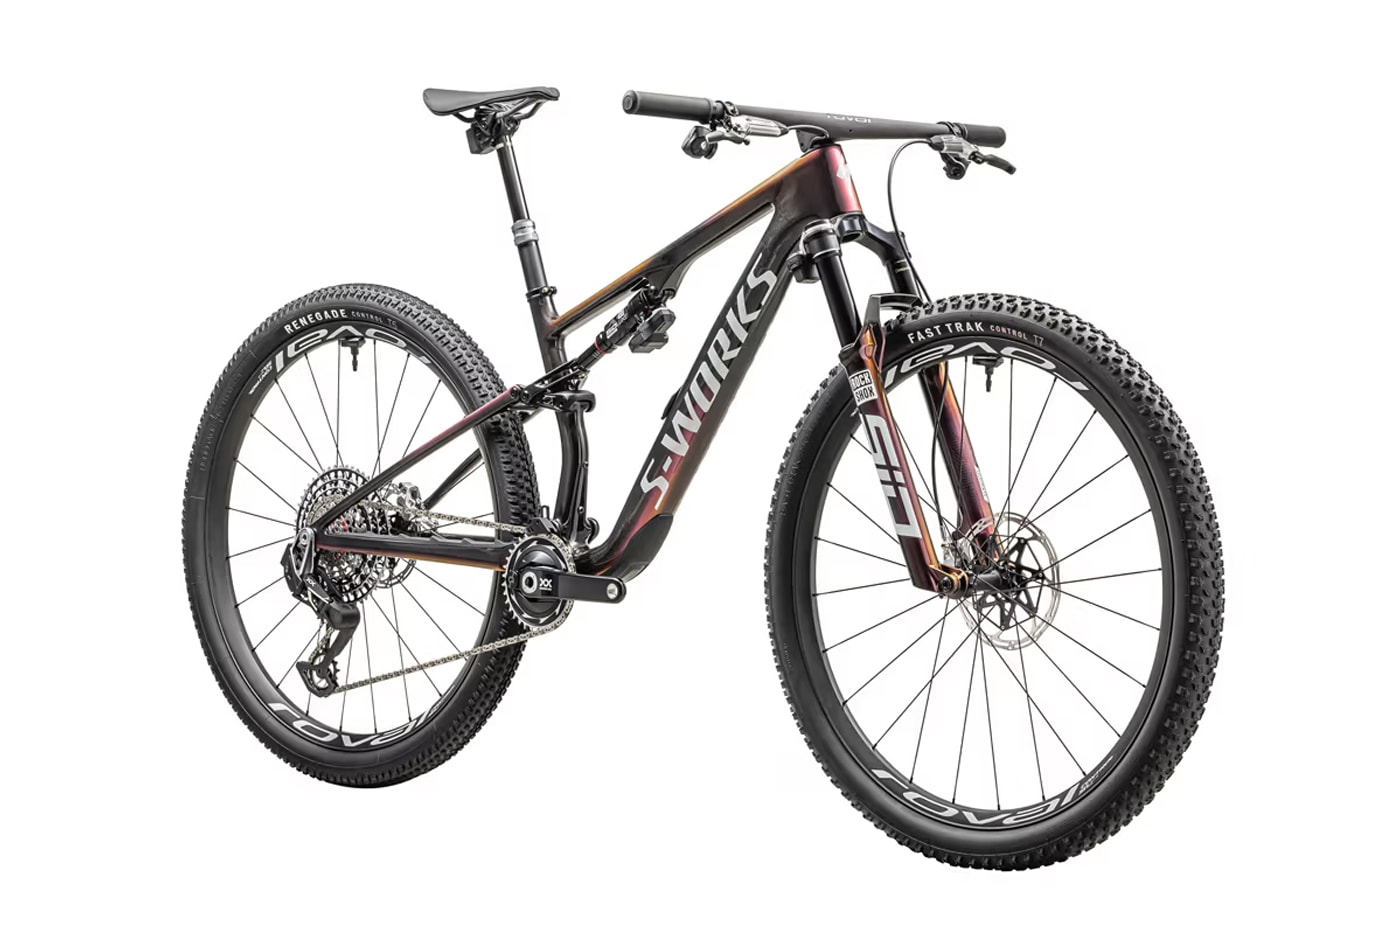 specialized bikes california based brand company epic 8 expert s work pro evo comp specs frame carbon details feature active suspension